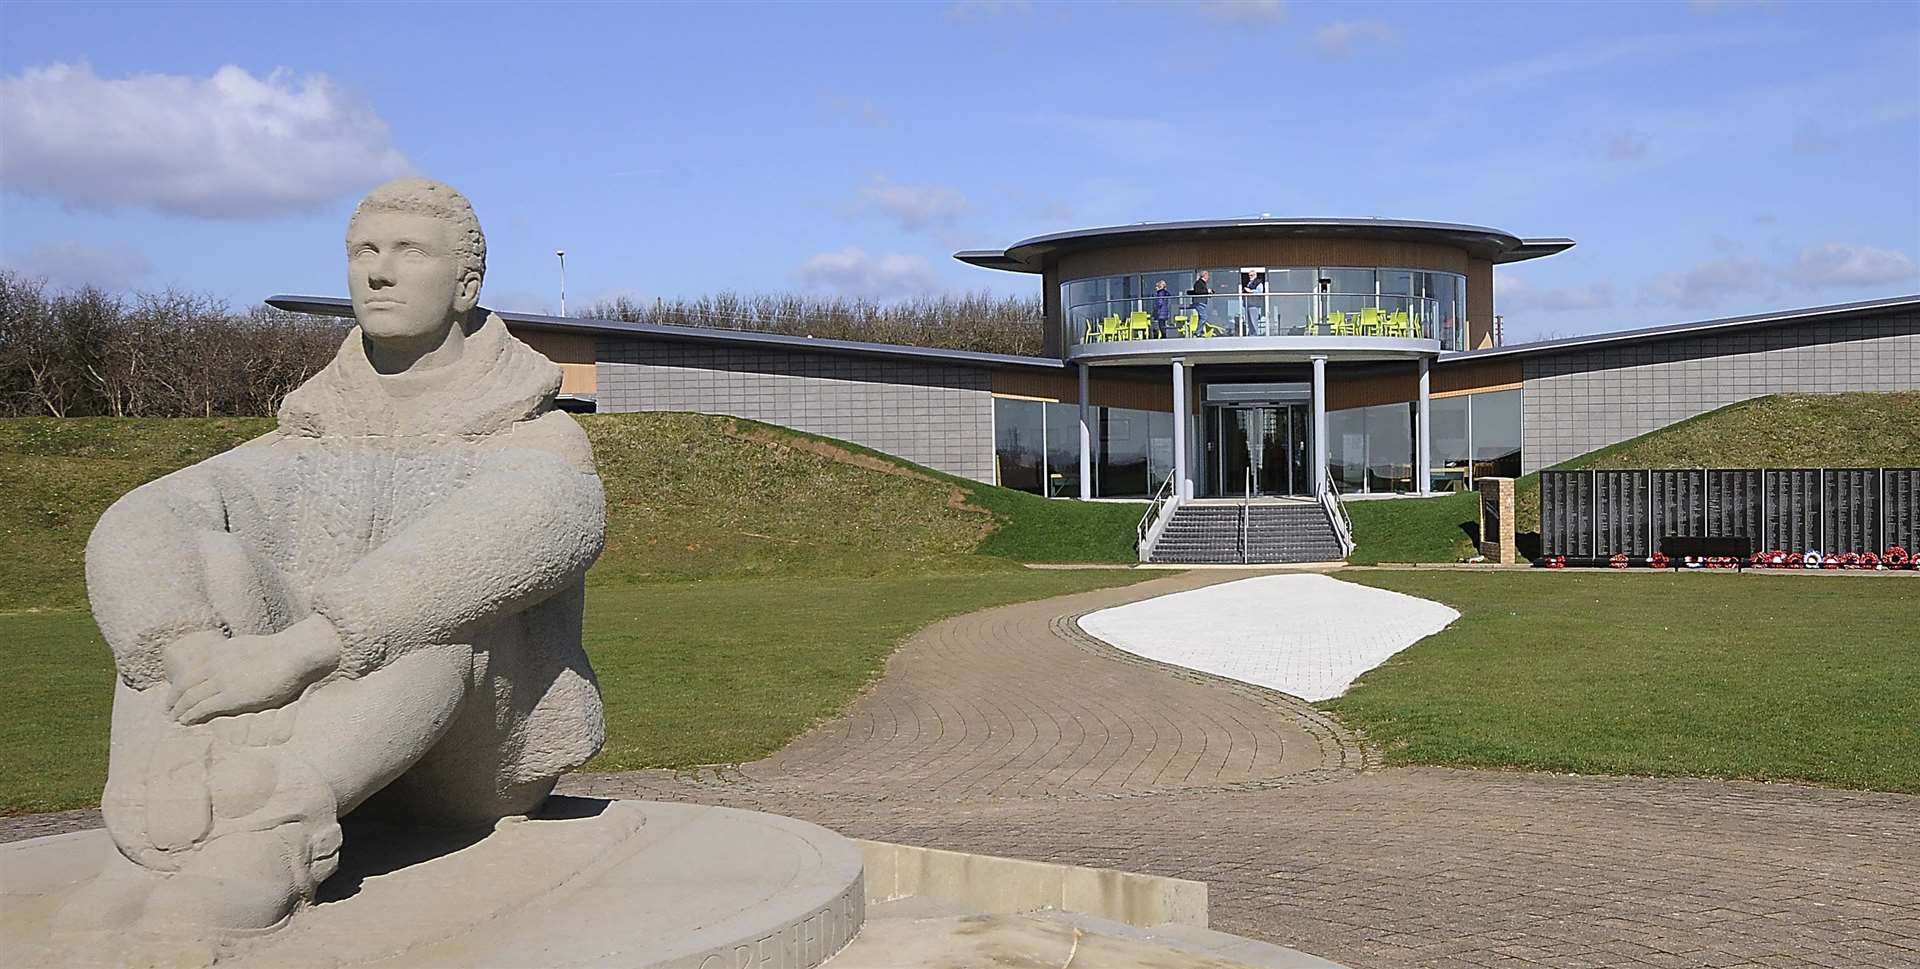 Discover fascinating military history at the Battle of Britain Memorial at Capel-le-Ferne, just outside Folkestone